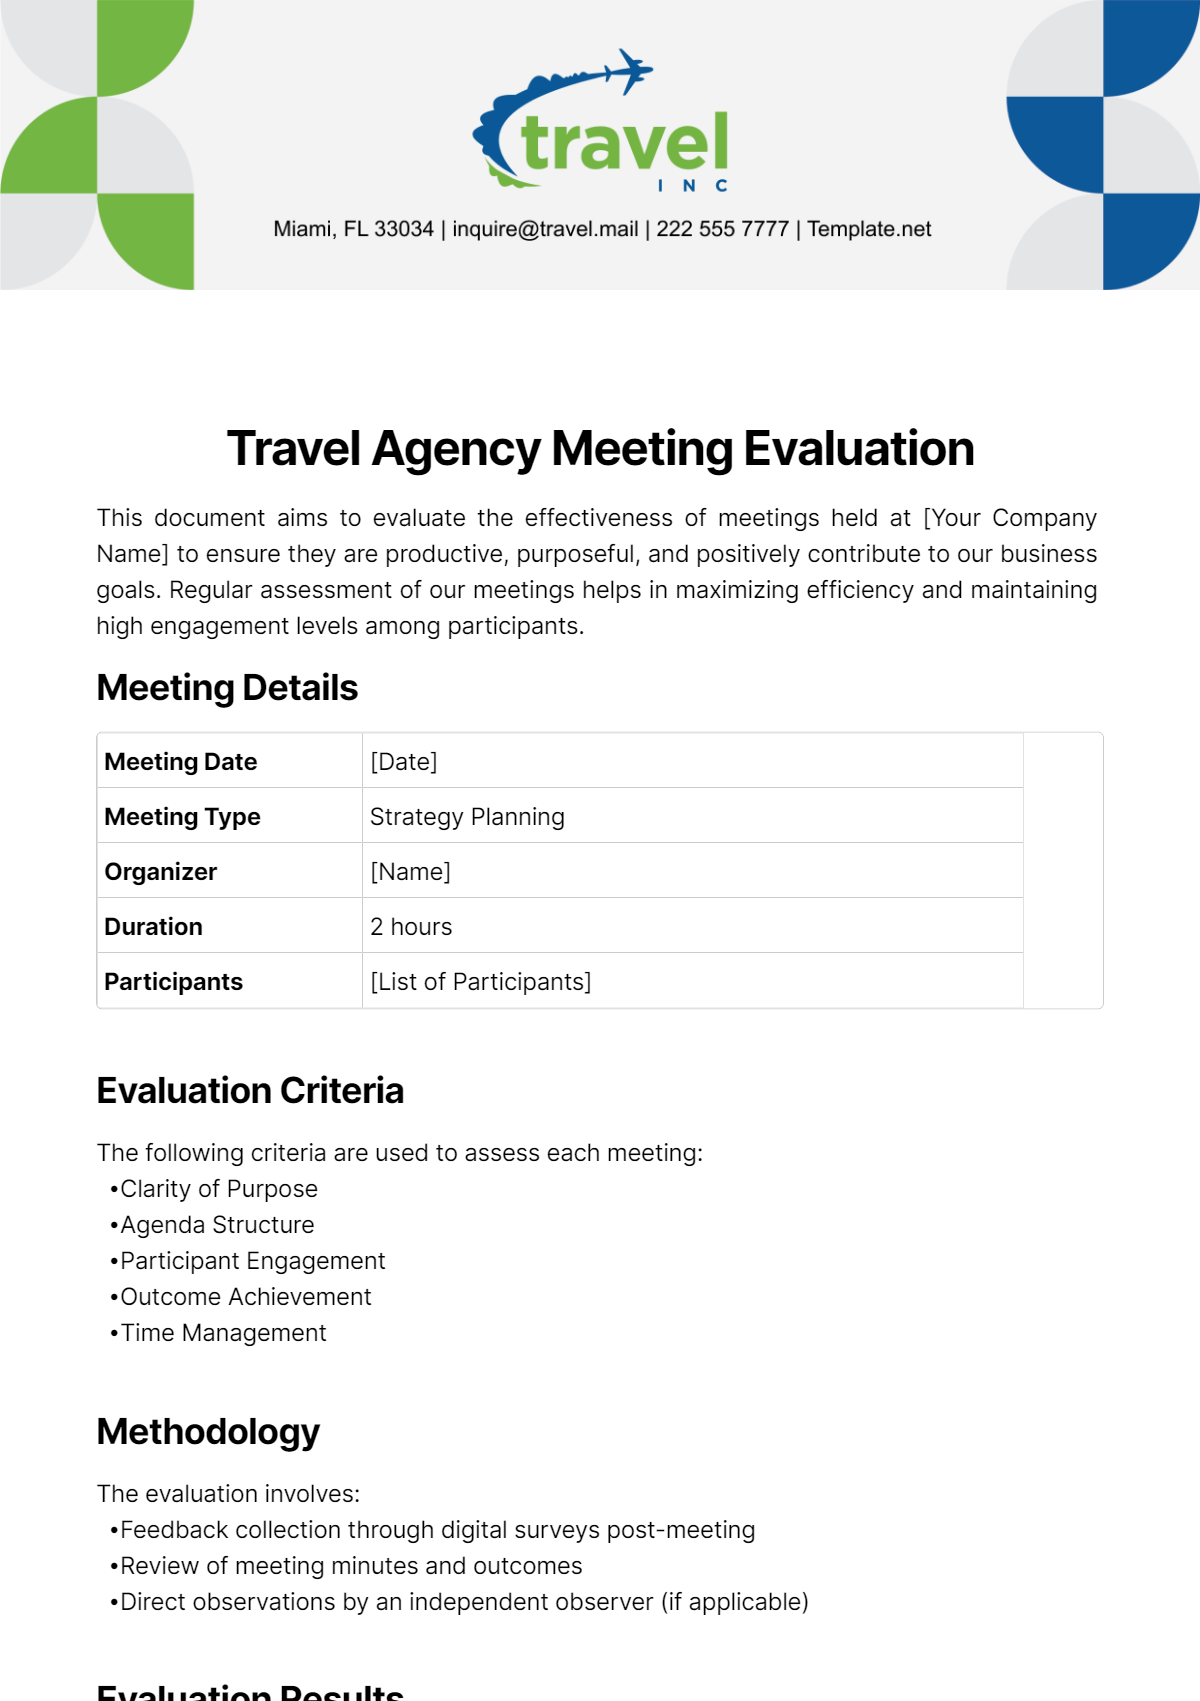 Free Travel Agency Meeting Evaluation Template